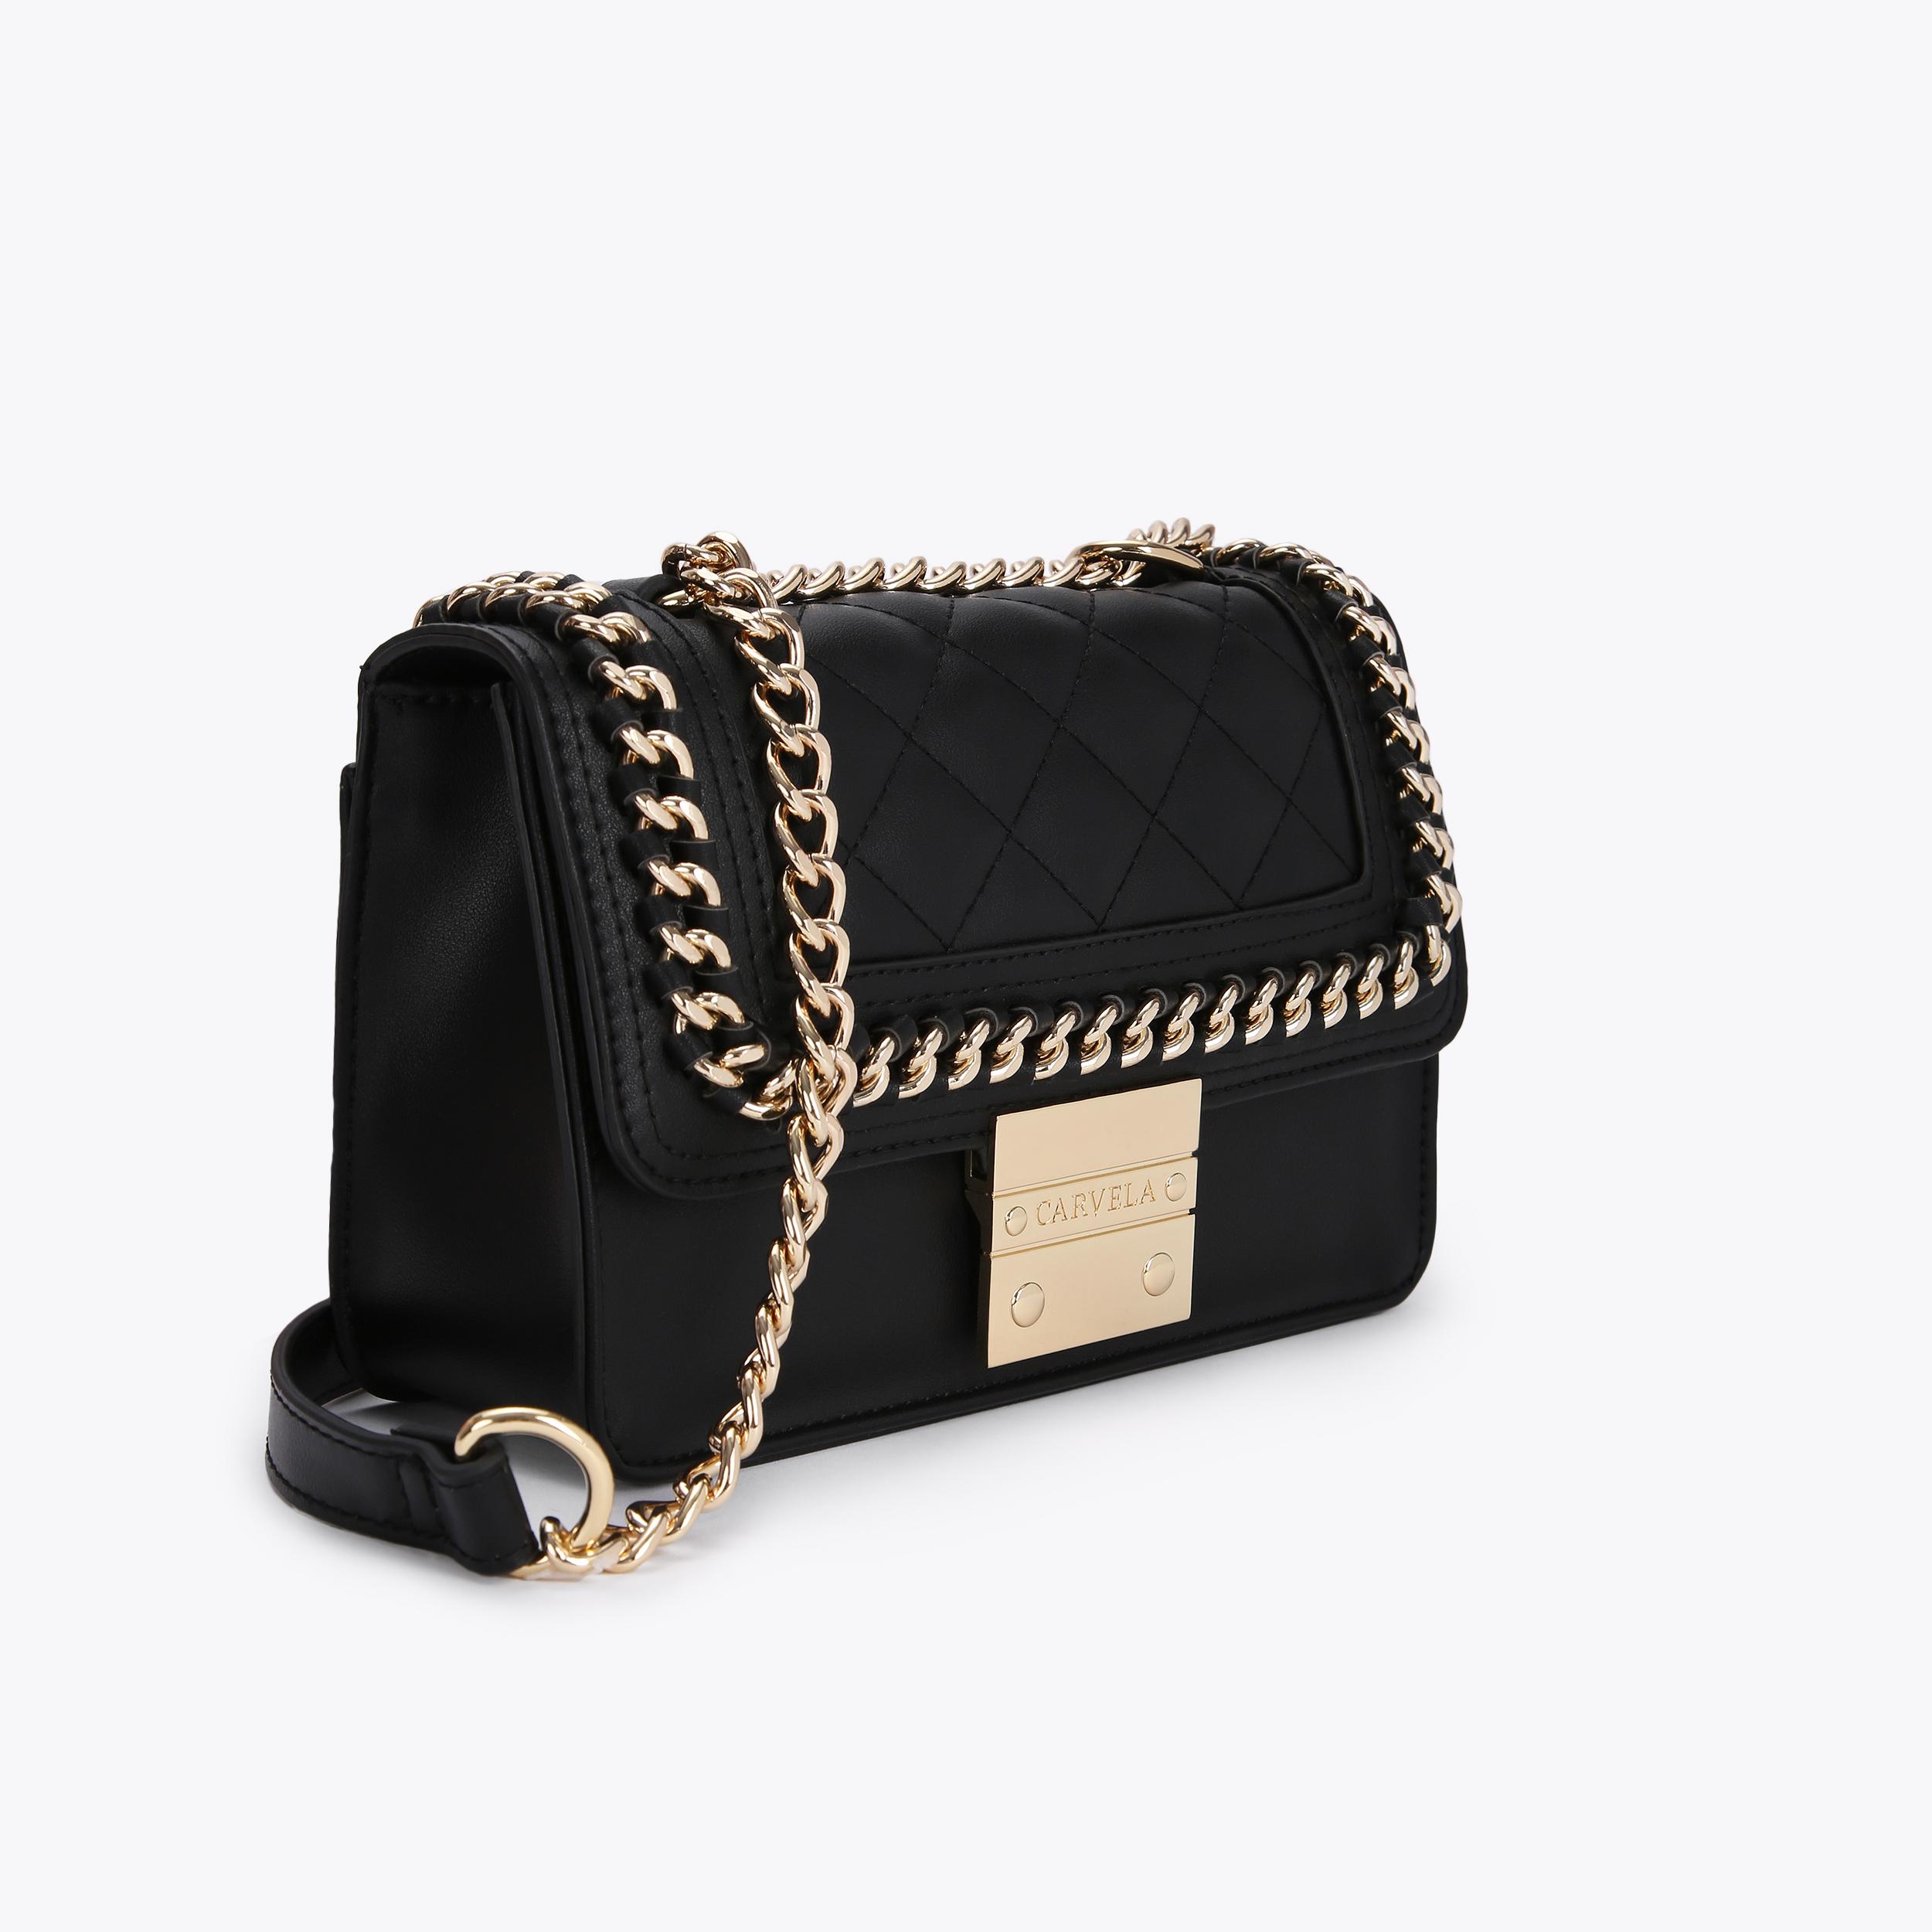 MINI BAILEY X BODY Black Quilted Cross Body Bag by CARVELA